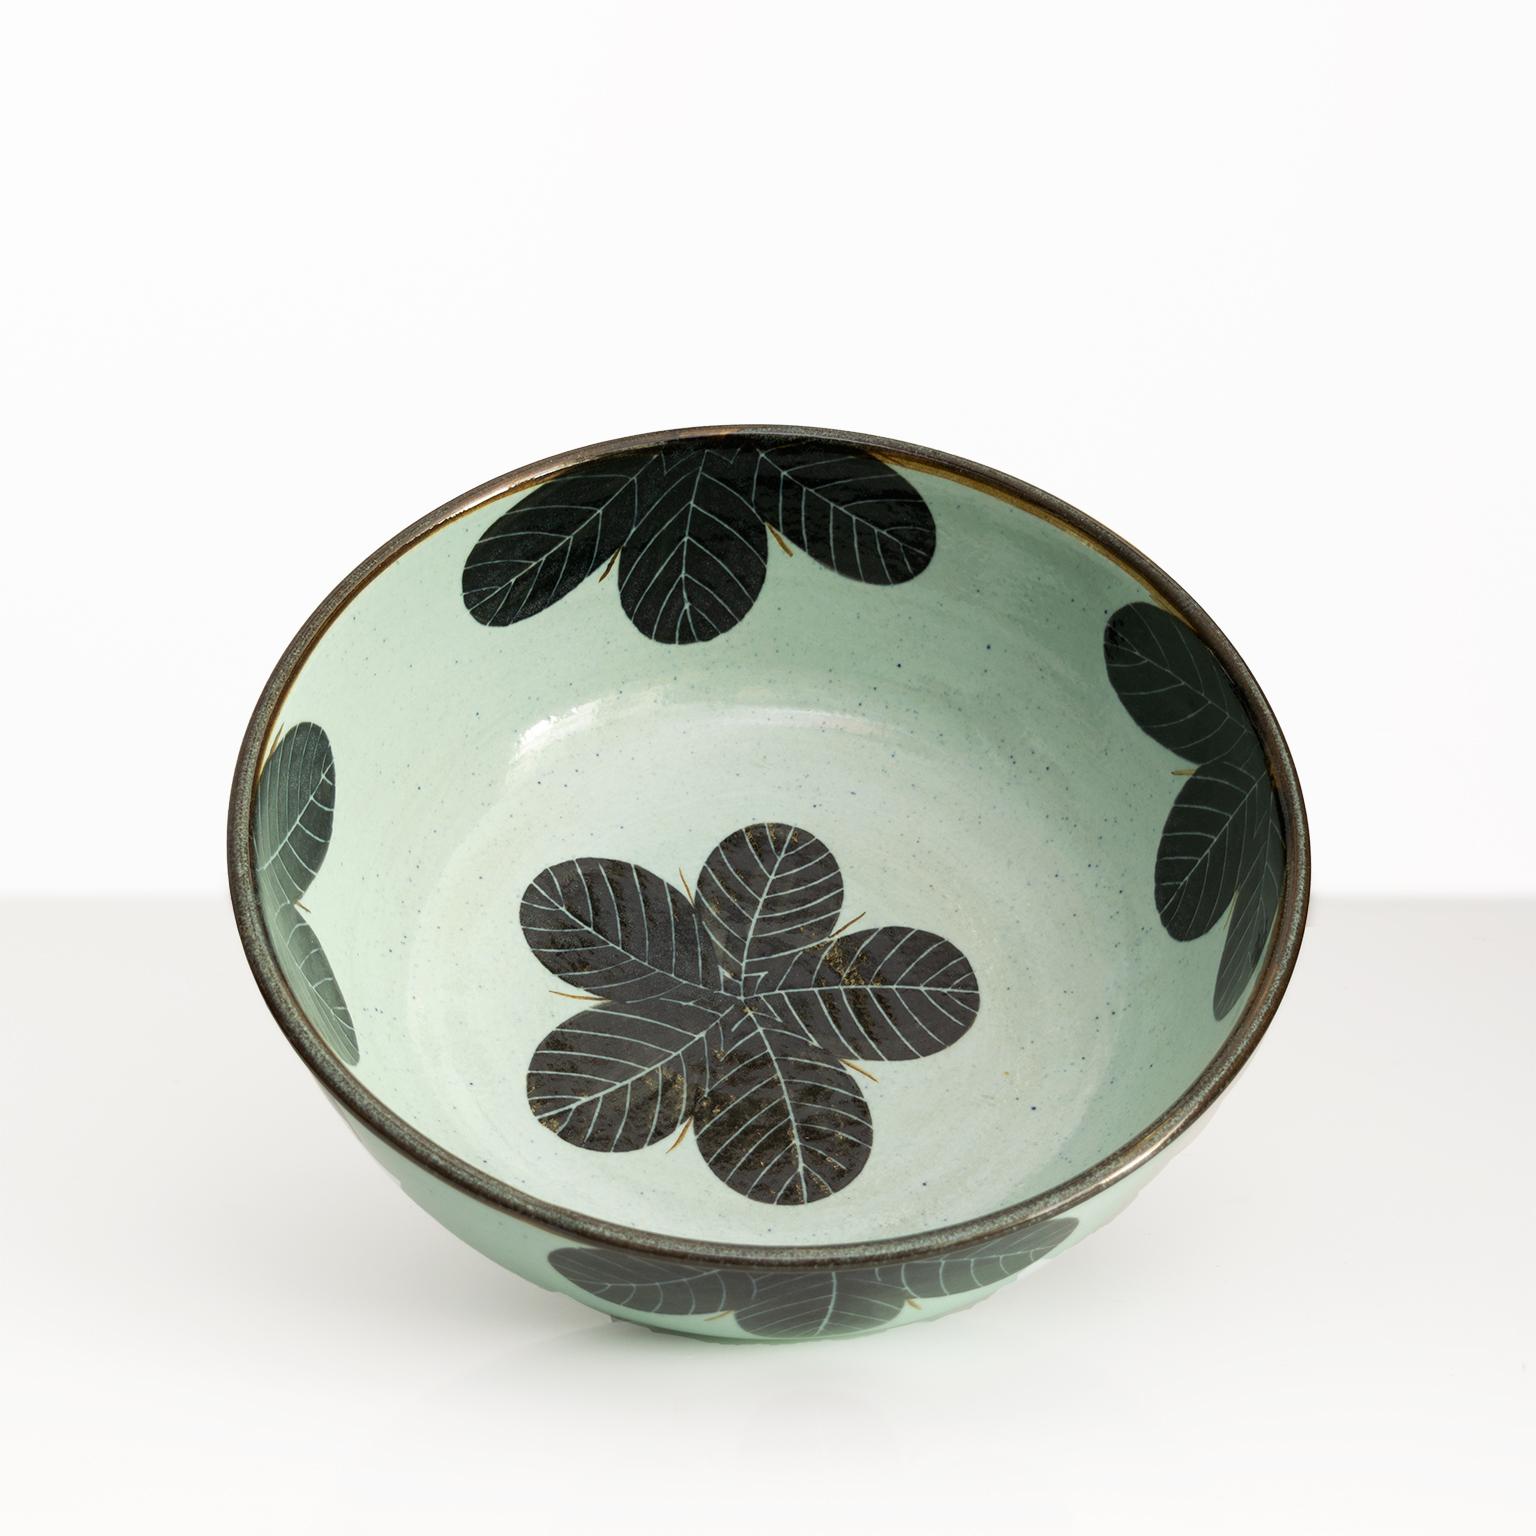 A large unique studio bowl by Britt-Louise Sundell for Gustavsberg, Sweden. The bowl has a jade colored glaze and is detail in dark blue-black flowers. Signed on the bottom, circa 1960’s.

Measures: Diameter: 13”, Height: 5”.